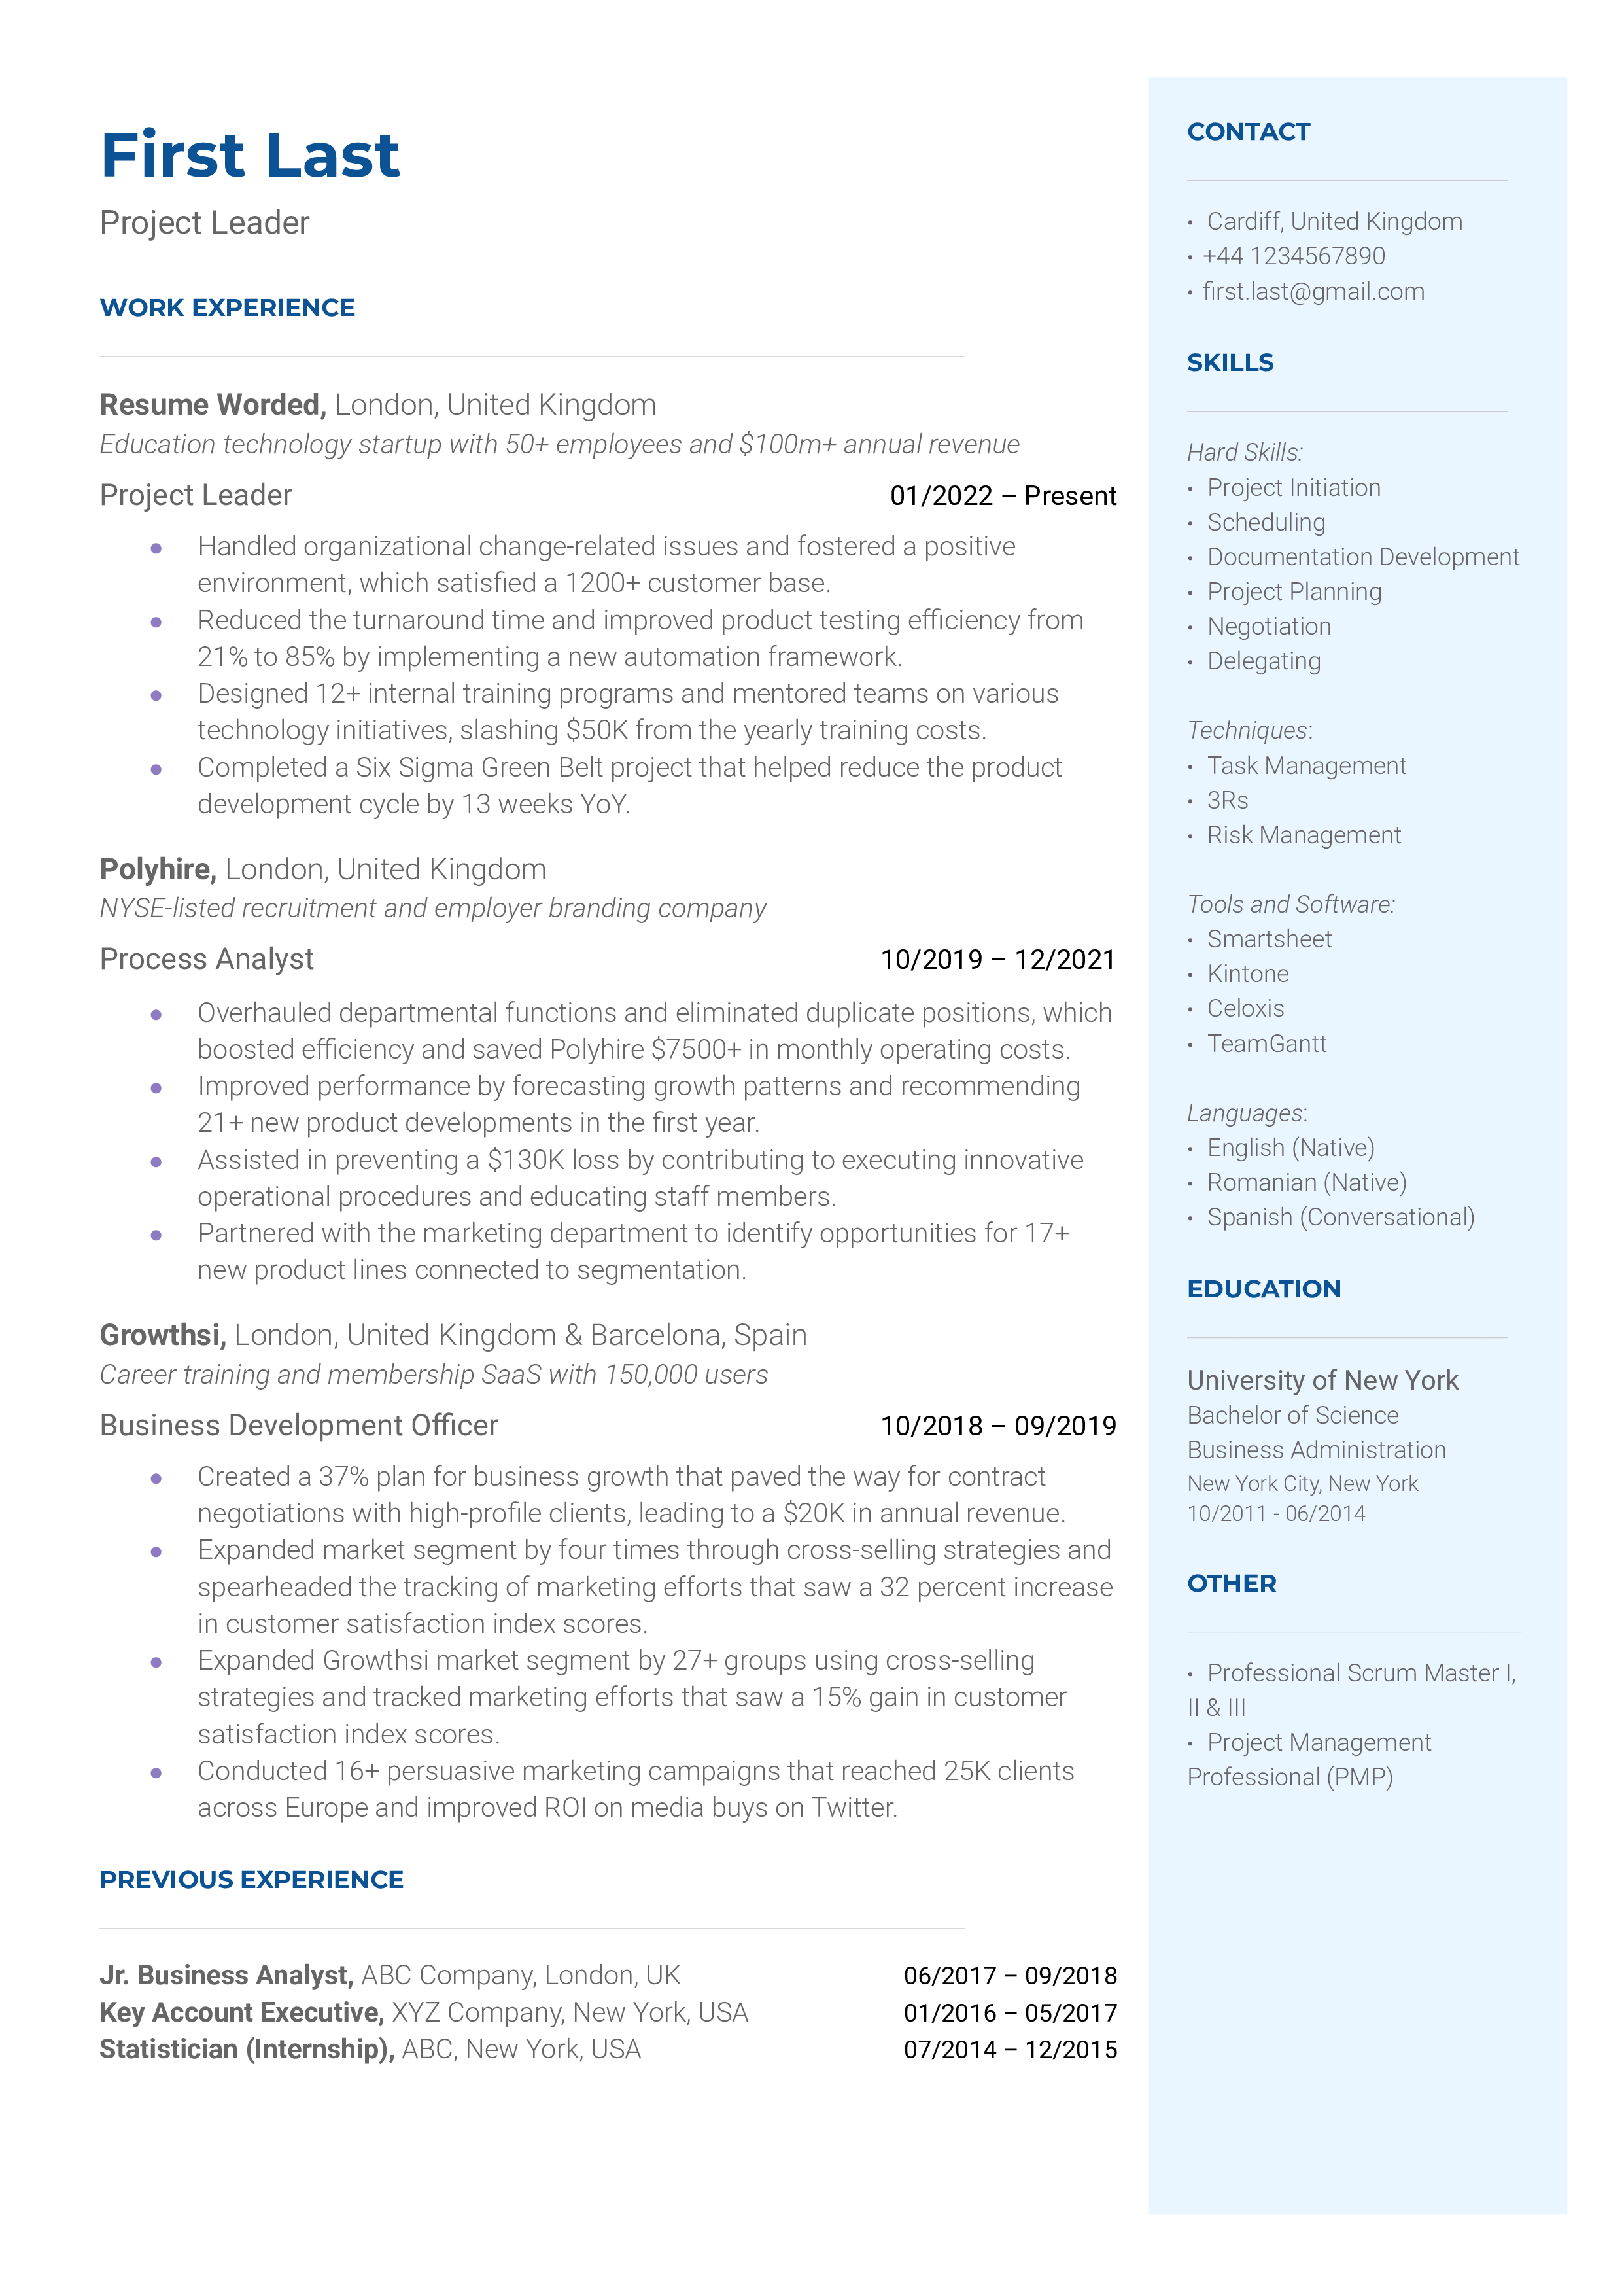 A project leader resume template highlighting technical skills.